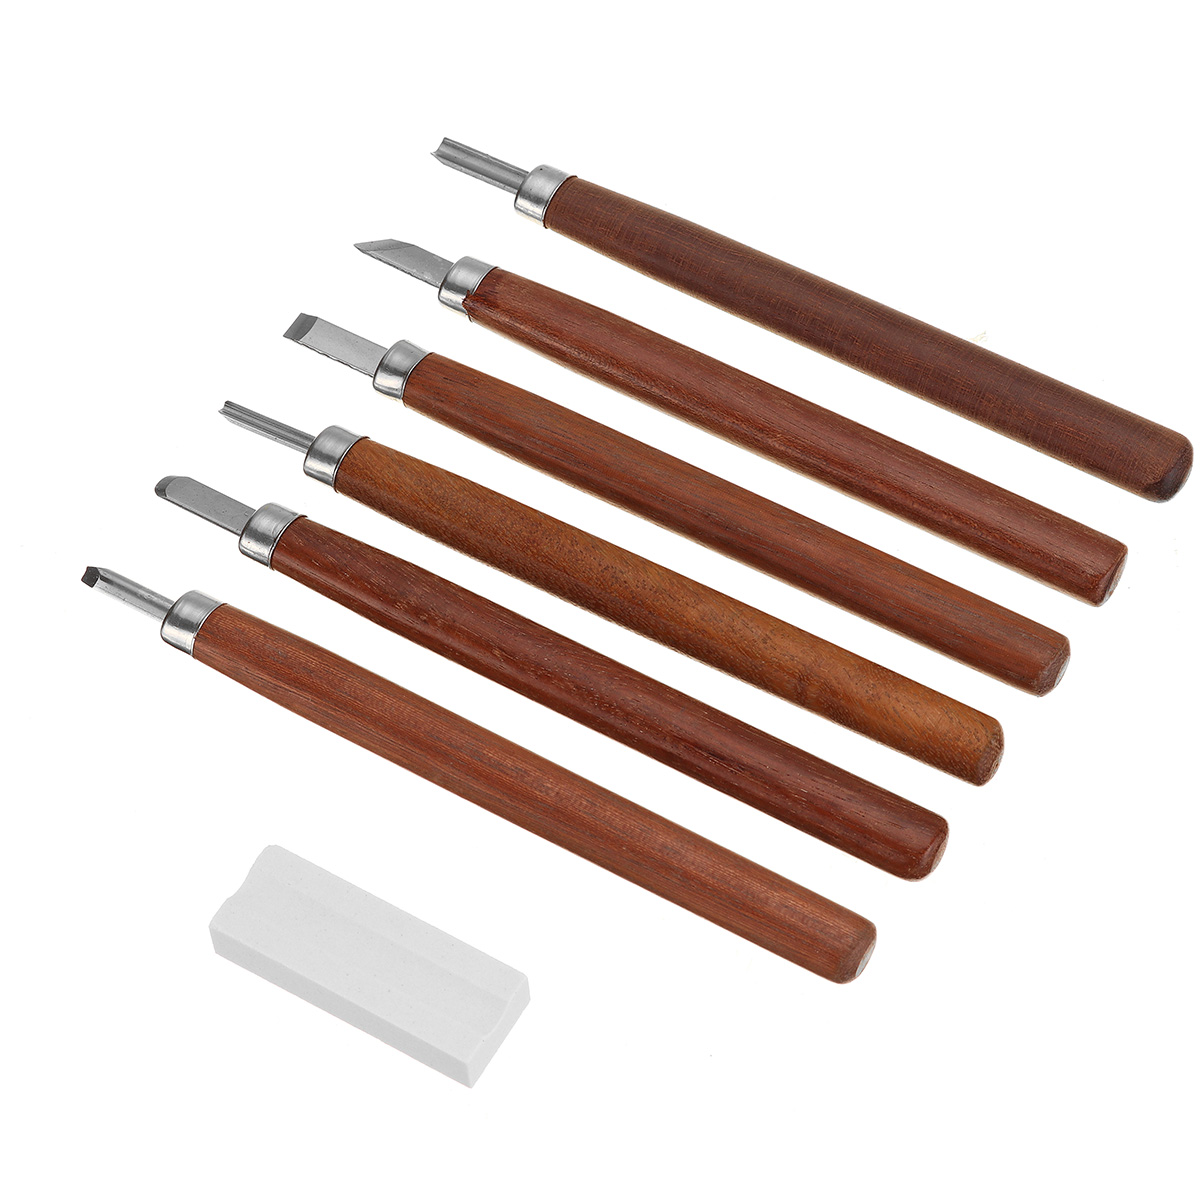 61012Pcs-Wood-Stone-Carving-Chisels-Hand-Woodworking-Kit-Cutter-Tools-Set-1773175-5